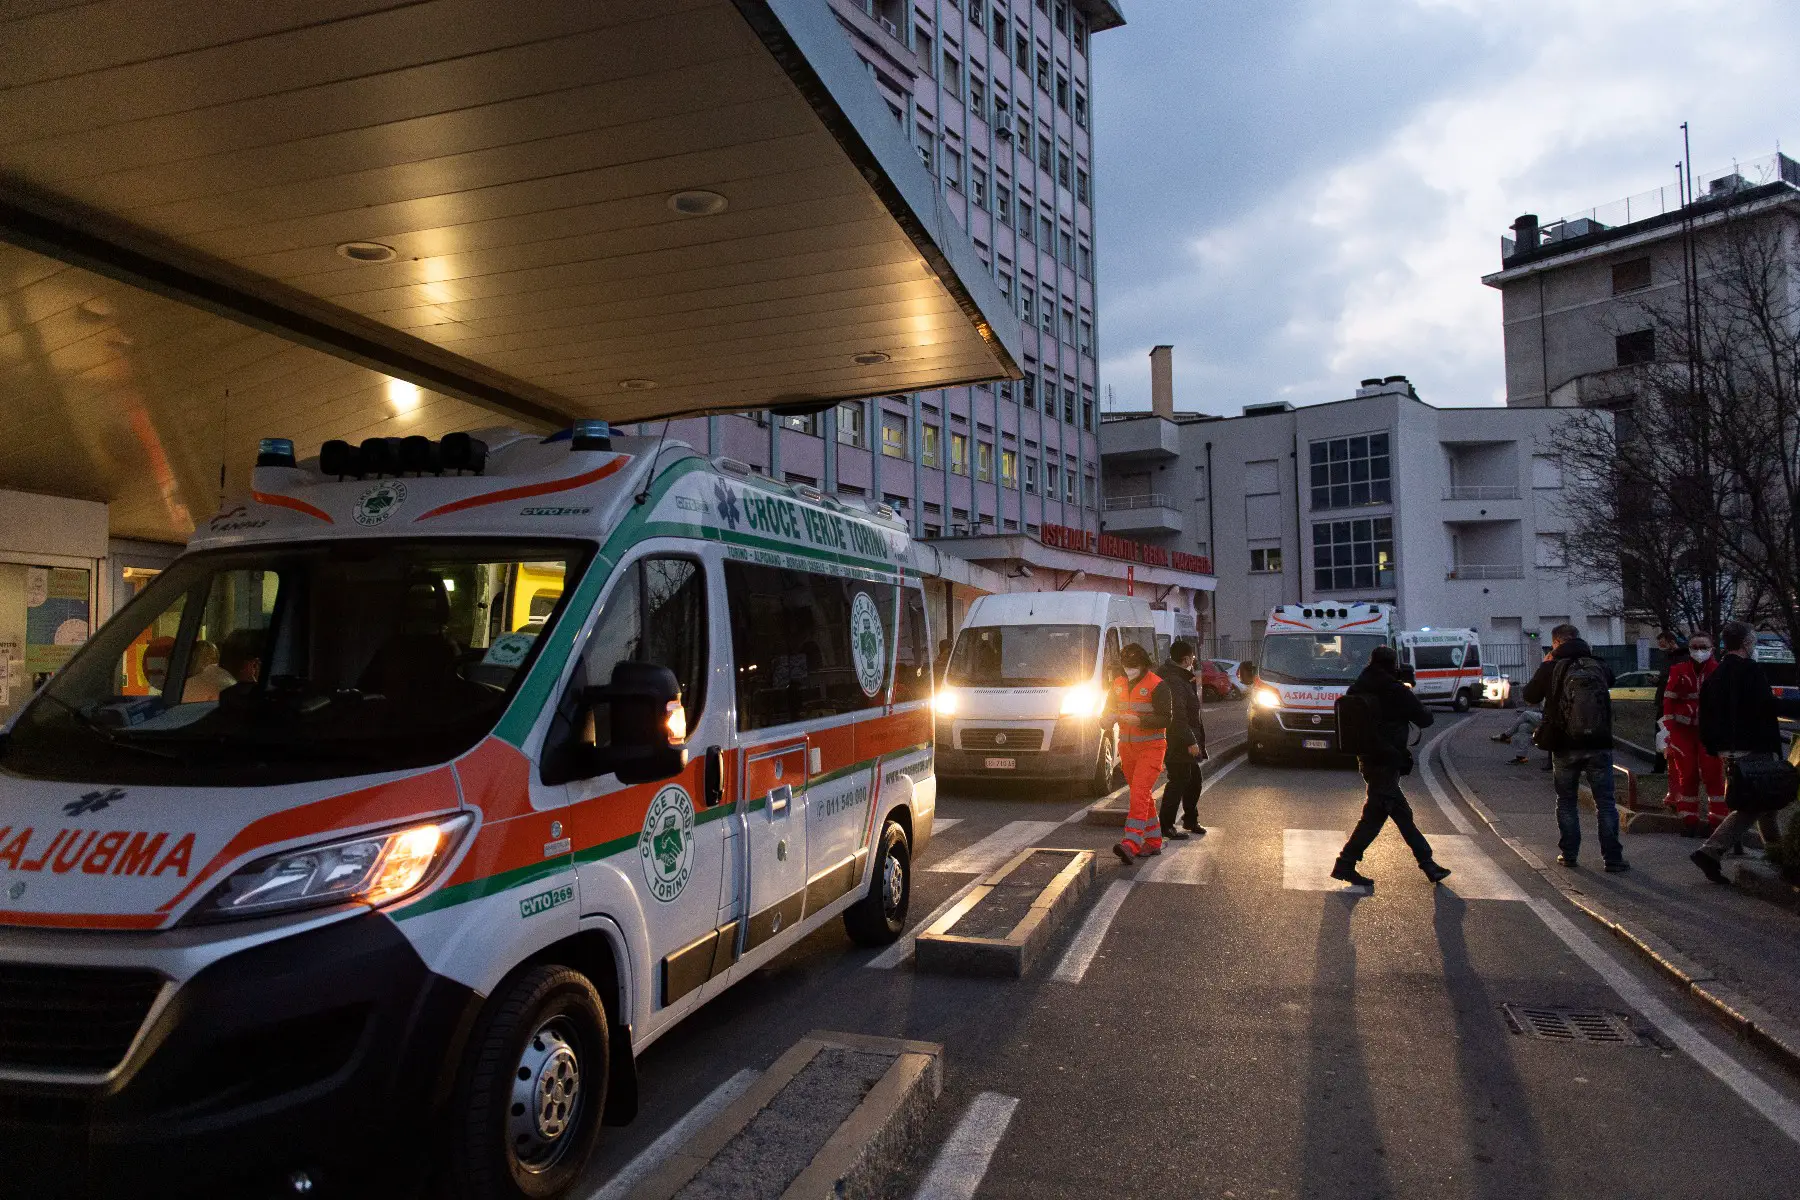 Ambulances standing in front of the Regina Margherita Children's Hospital in Torino, Italy.